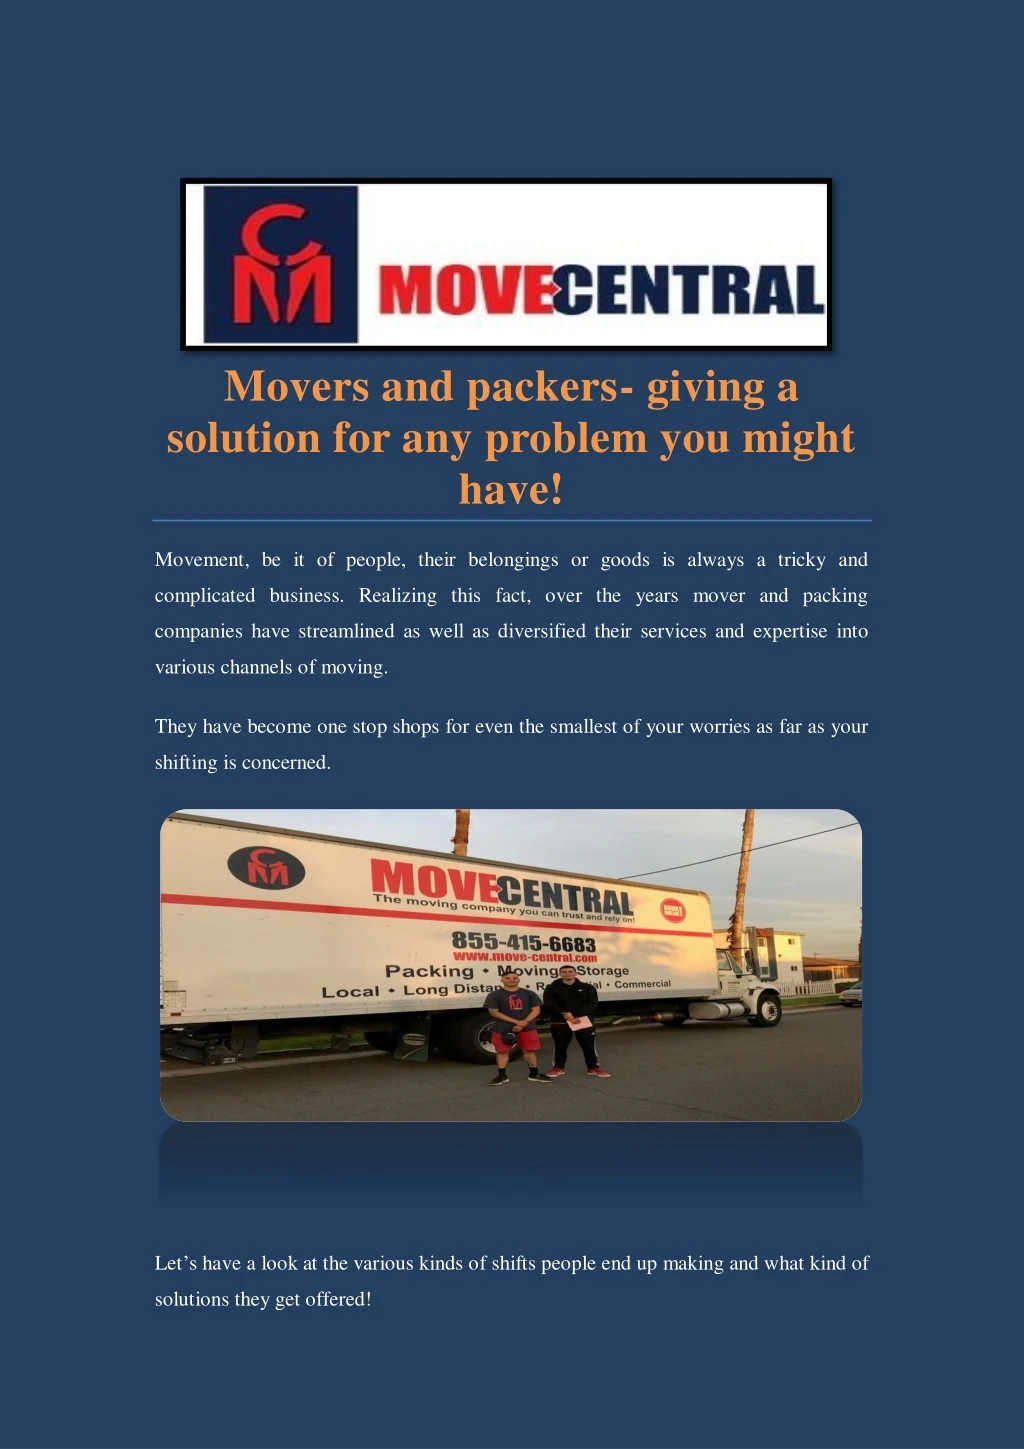 movers and packers giving a solution